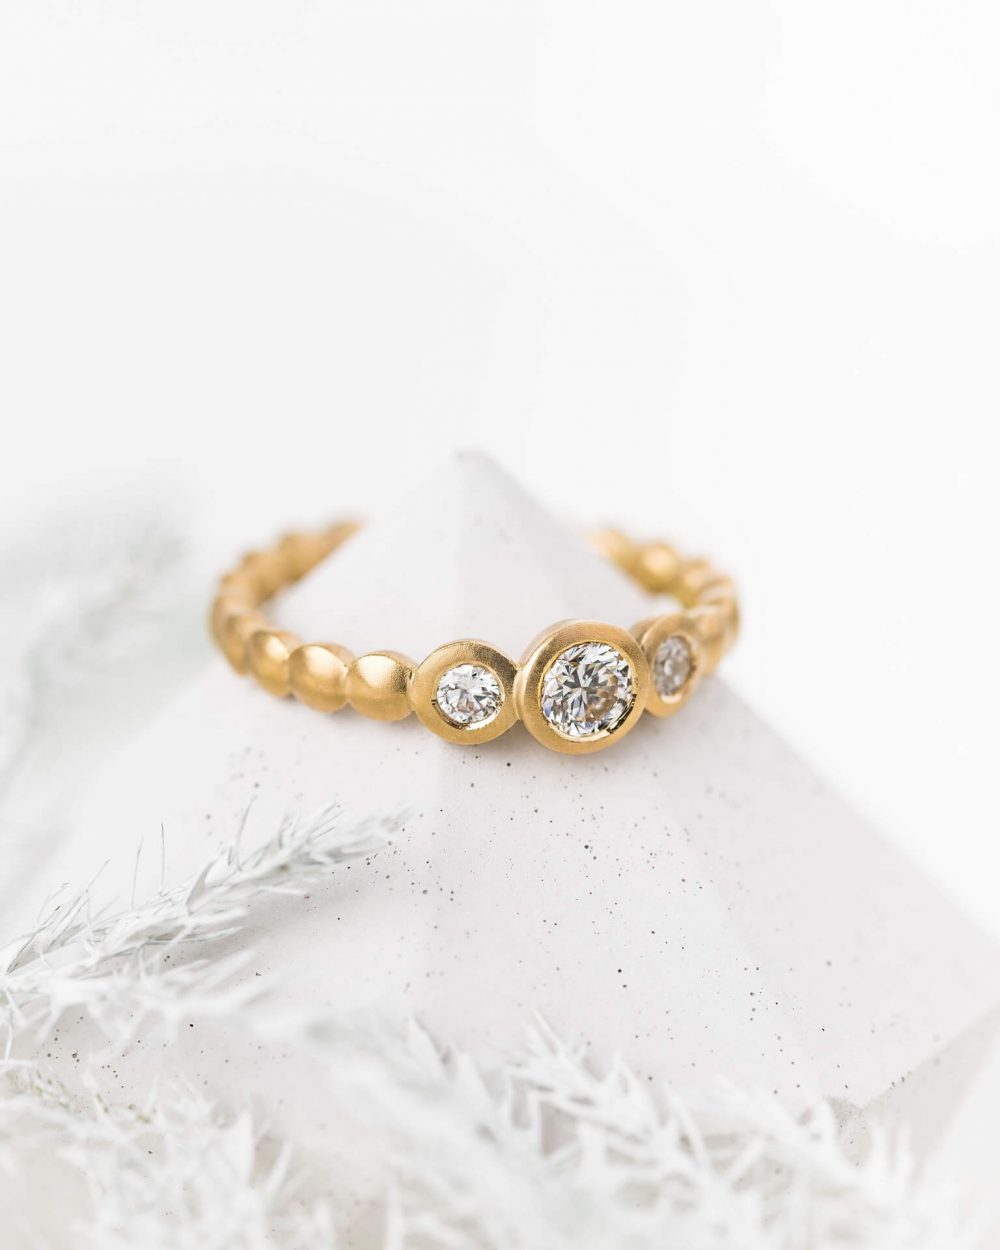 Trio Diamond Engagement Ring Pictured In Yellow Gold, Designed By Jacks Turner In Bristol.